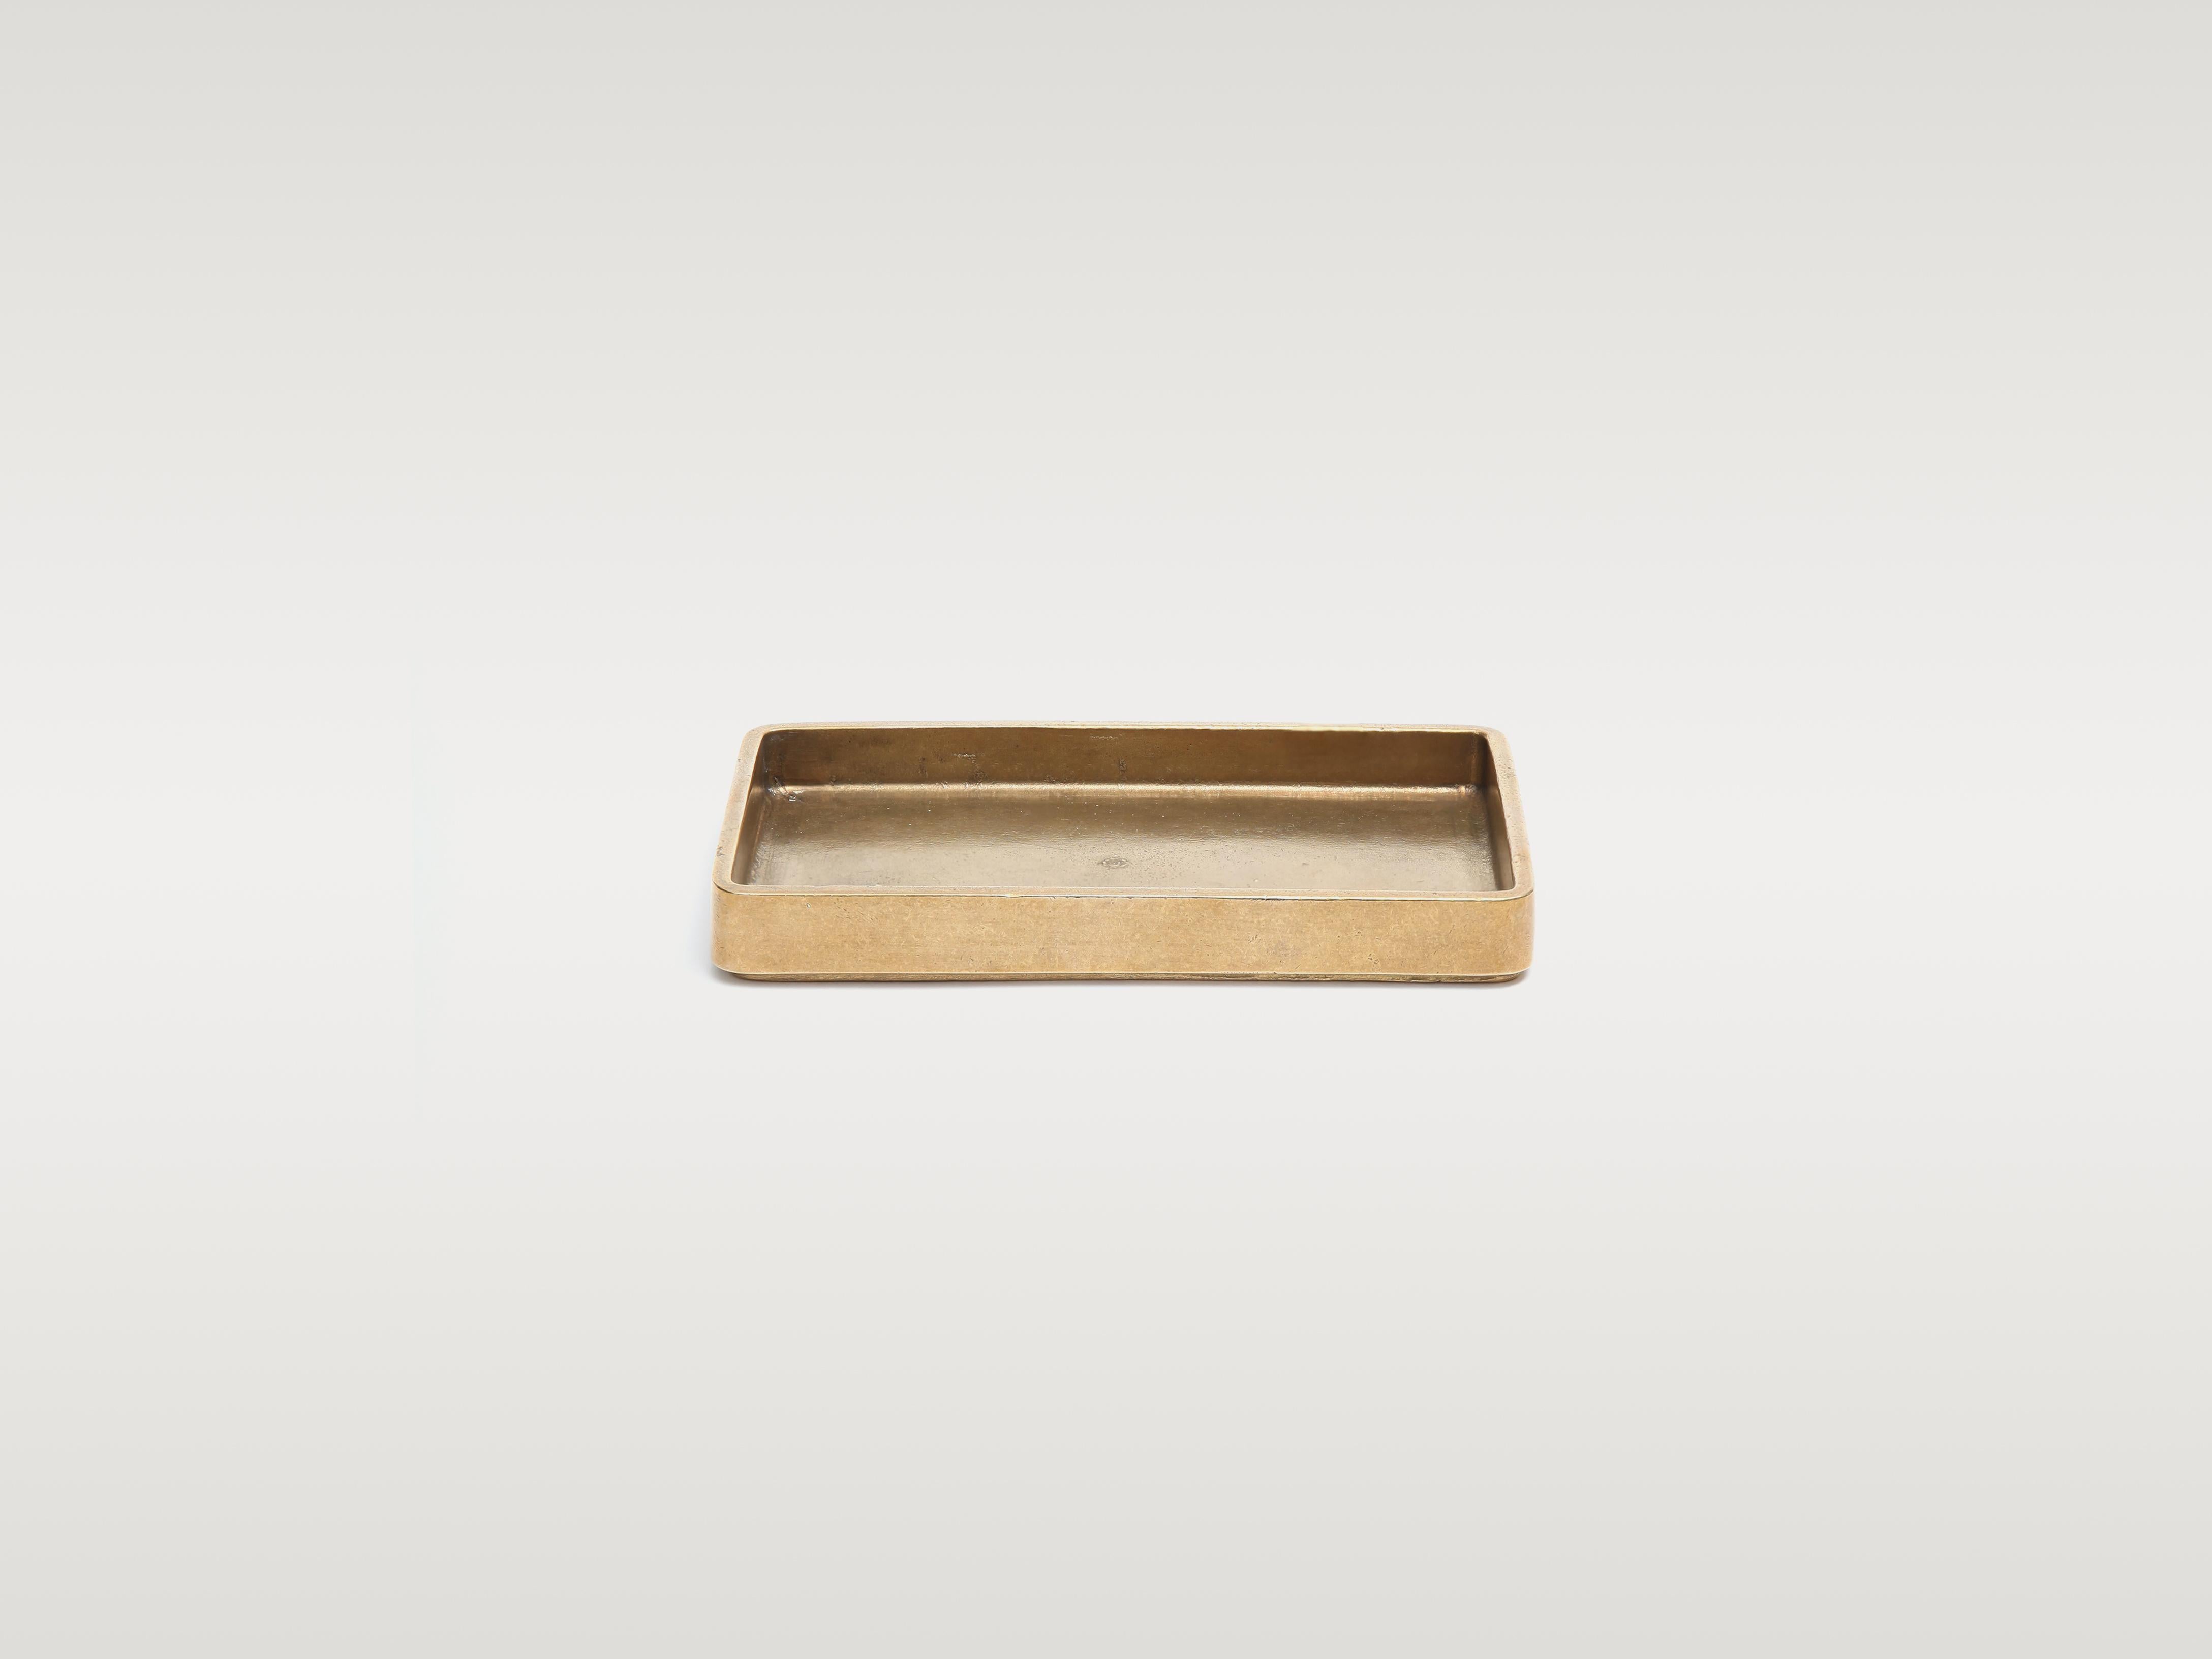 Brass Plato Table Tray by Stem Design
Dimensions: D 11.5 x W 20 x H 2.5 cm.
Materials: Brass.
Finish: Tumbled and burnished.
Weight: 2 kg.

Finished and assembled by hand in India. Also available in aluminum. Please contact us. 

A compact accent